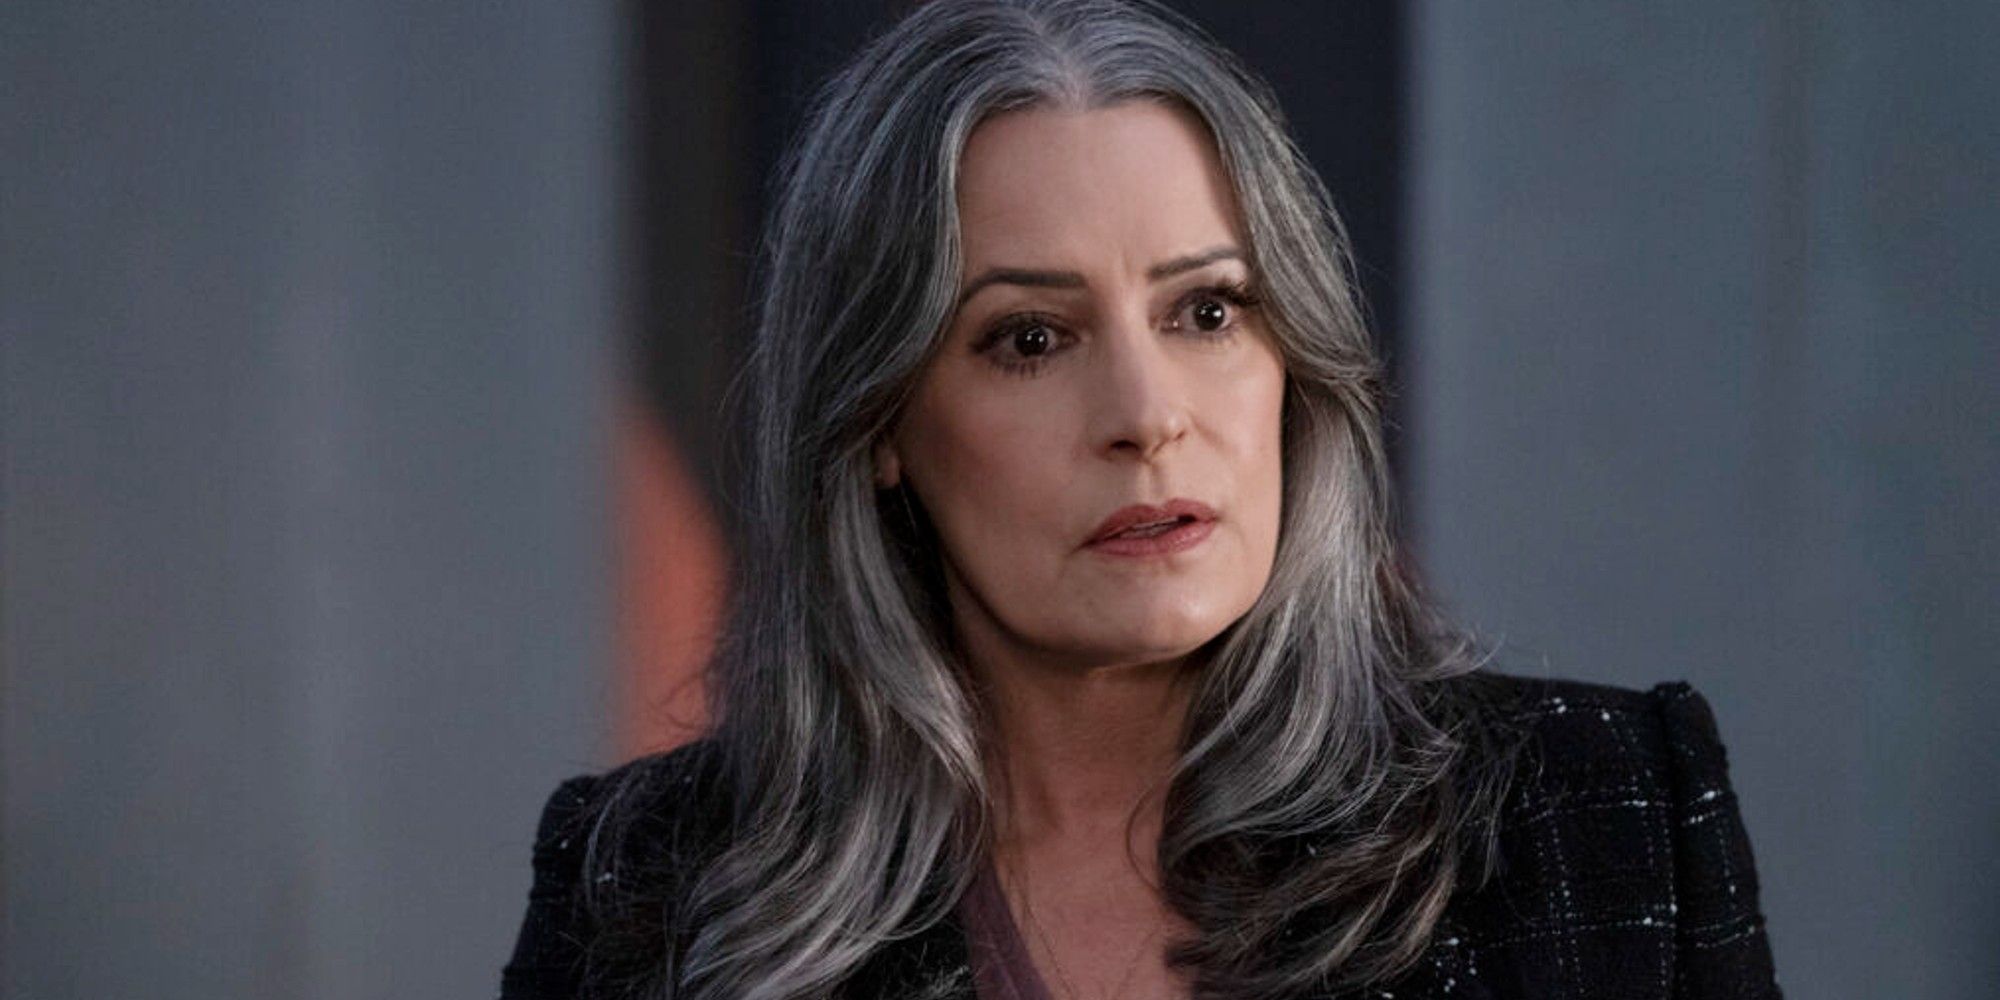 Paget Brewster as Emily Prentiss looking stunned in Criminal Minds Evolution season 1